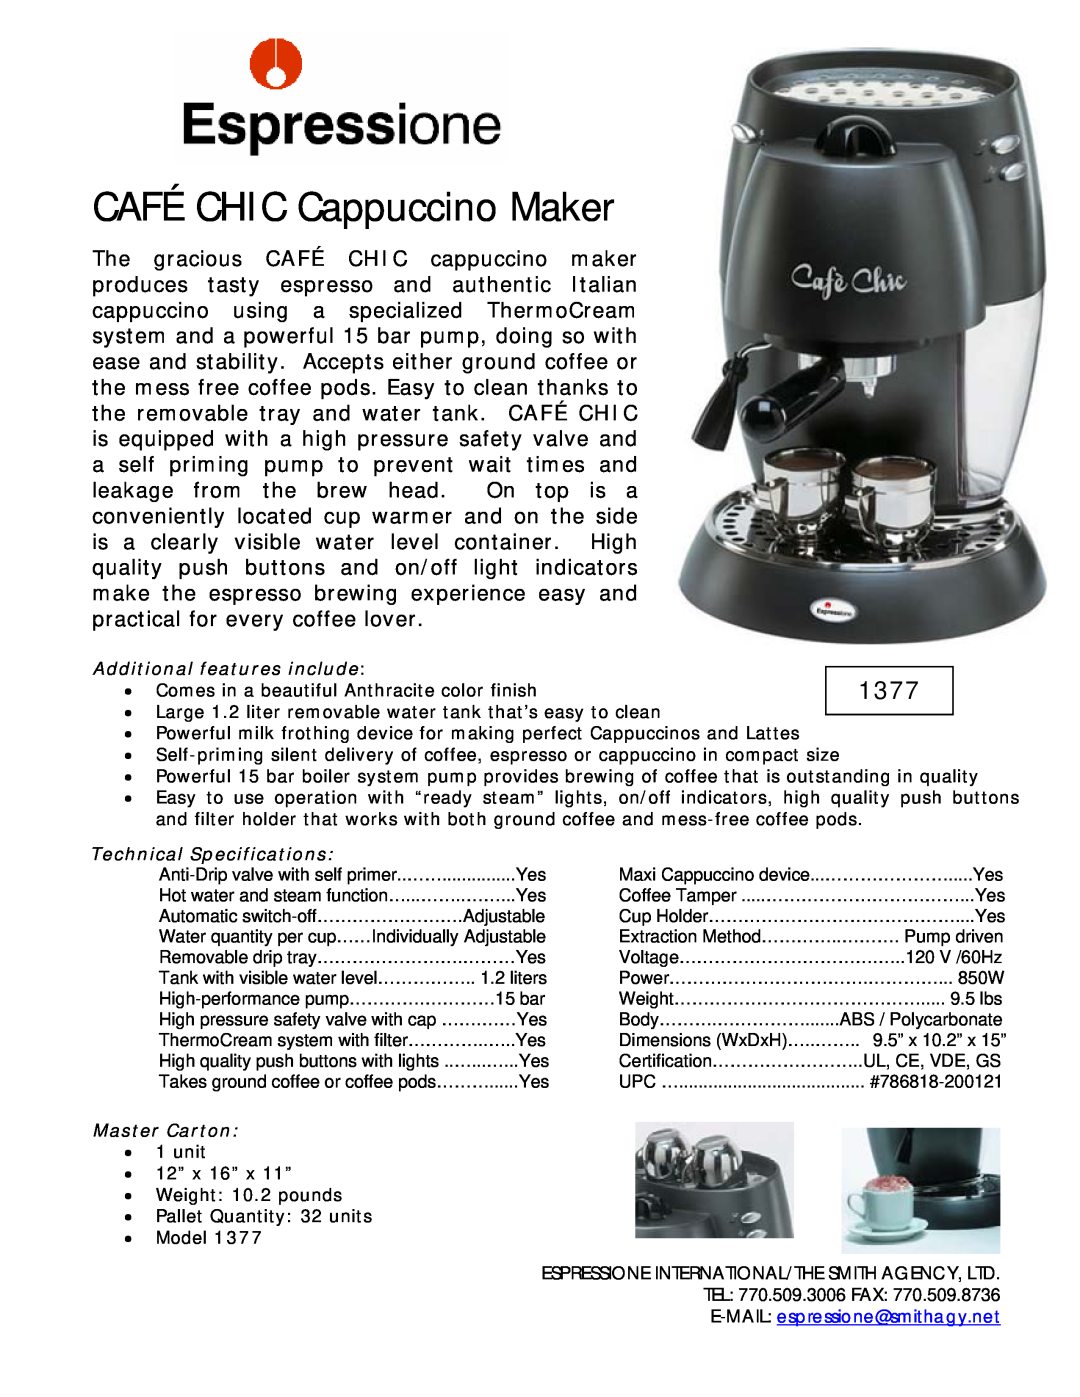 Dualit 1377 technical specifications CAFÉ CHIC Cappuccino Maker, Additional features include, Technical Specifications 